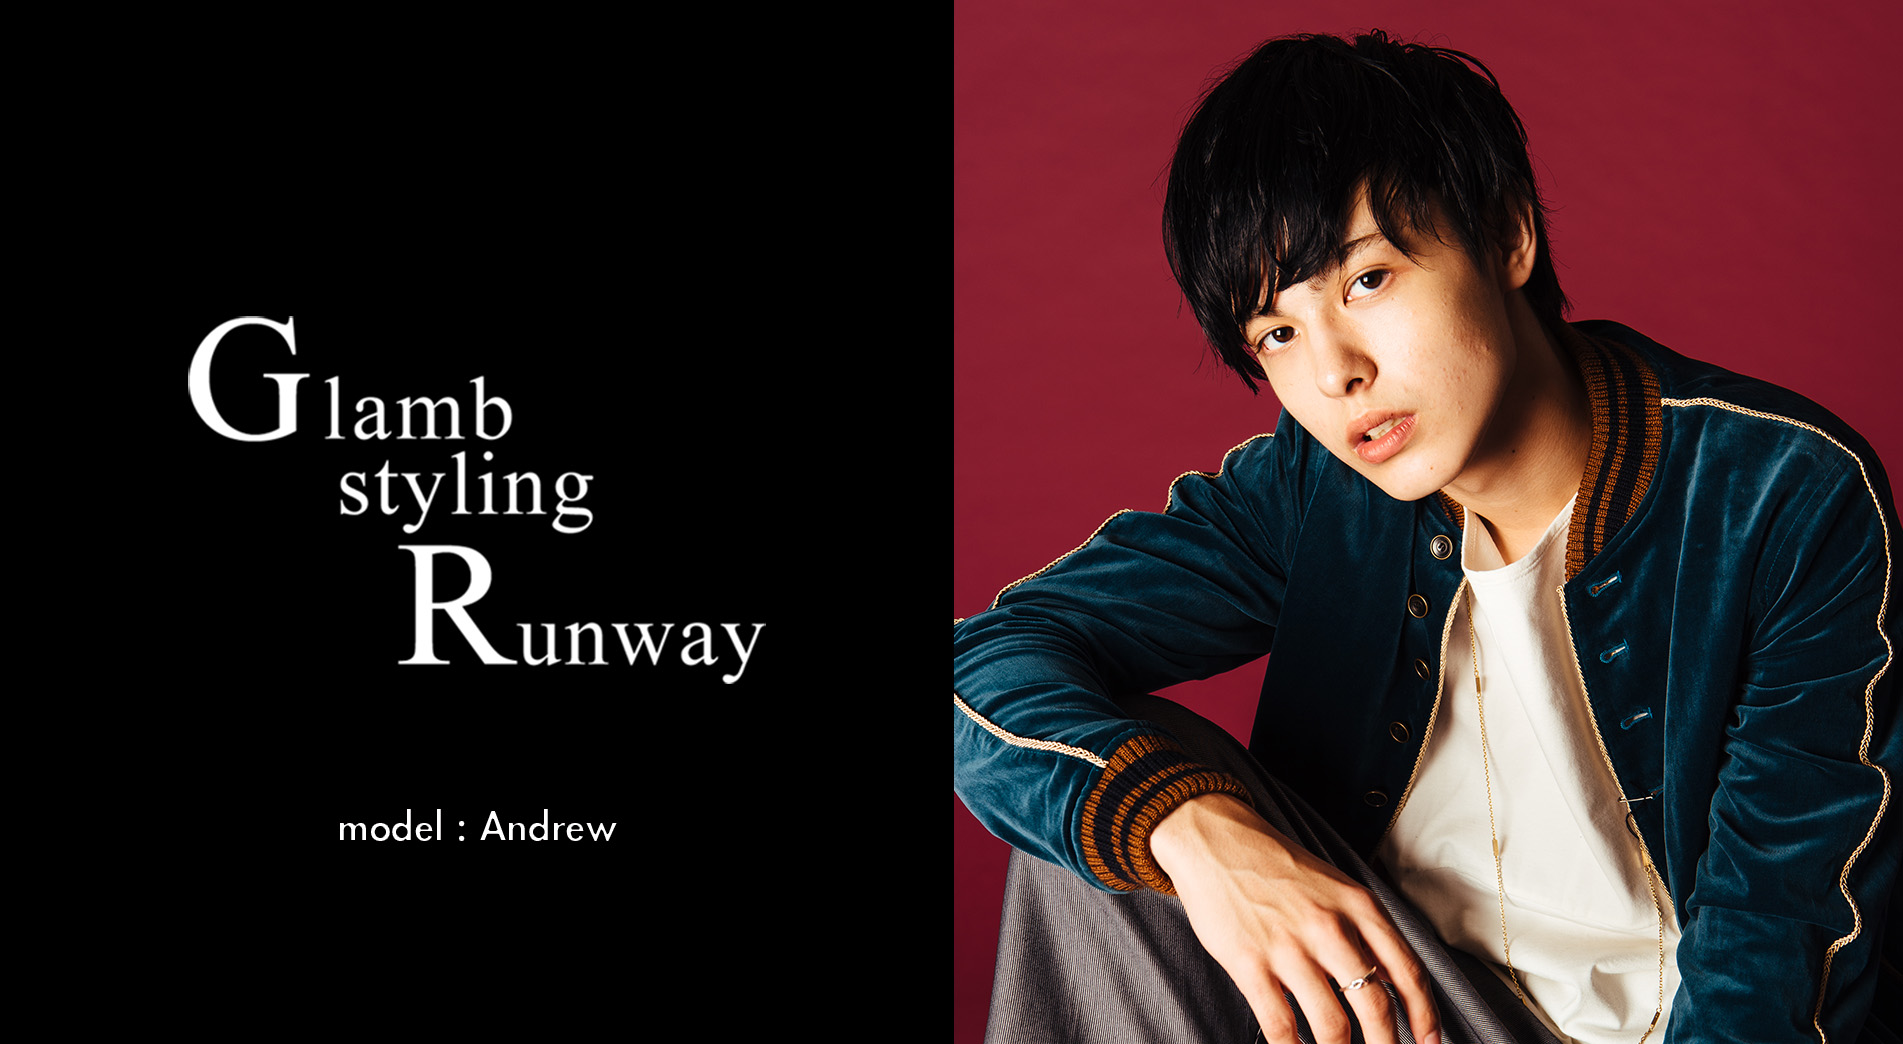 Glamb styling Runway | glamb Online Store - 公式通販サイト